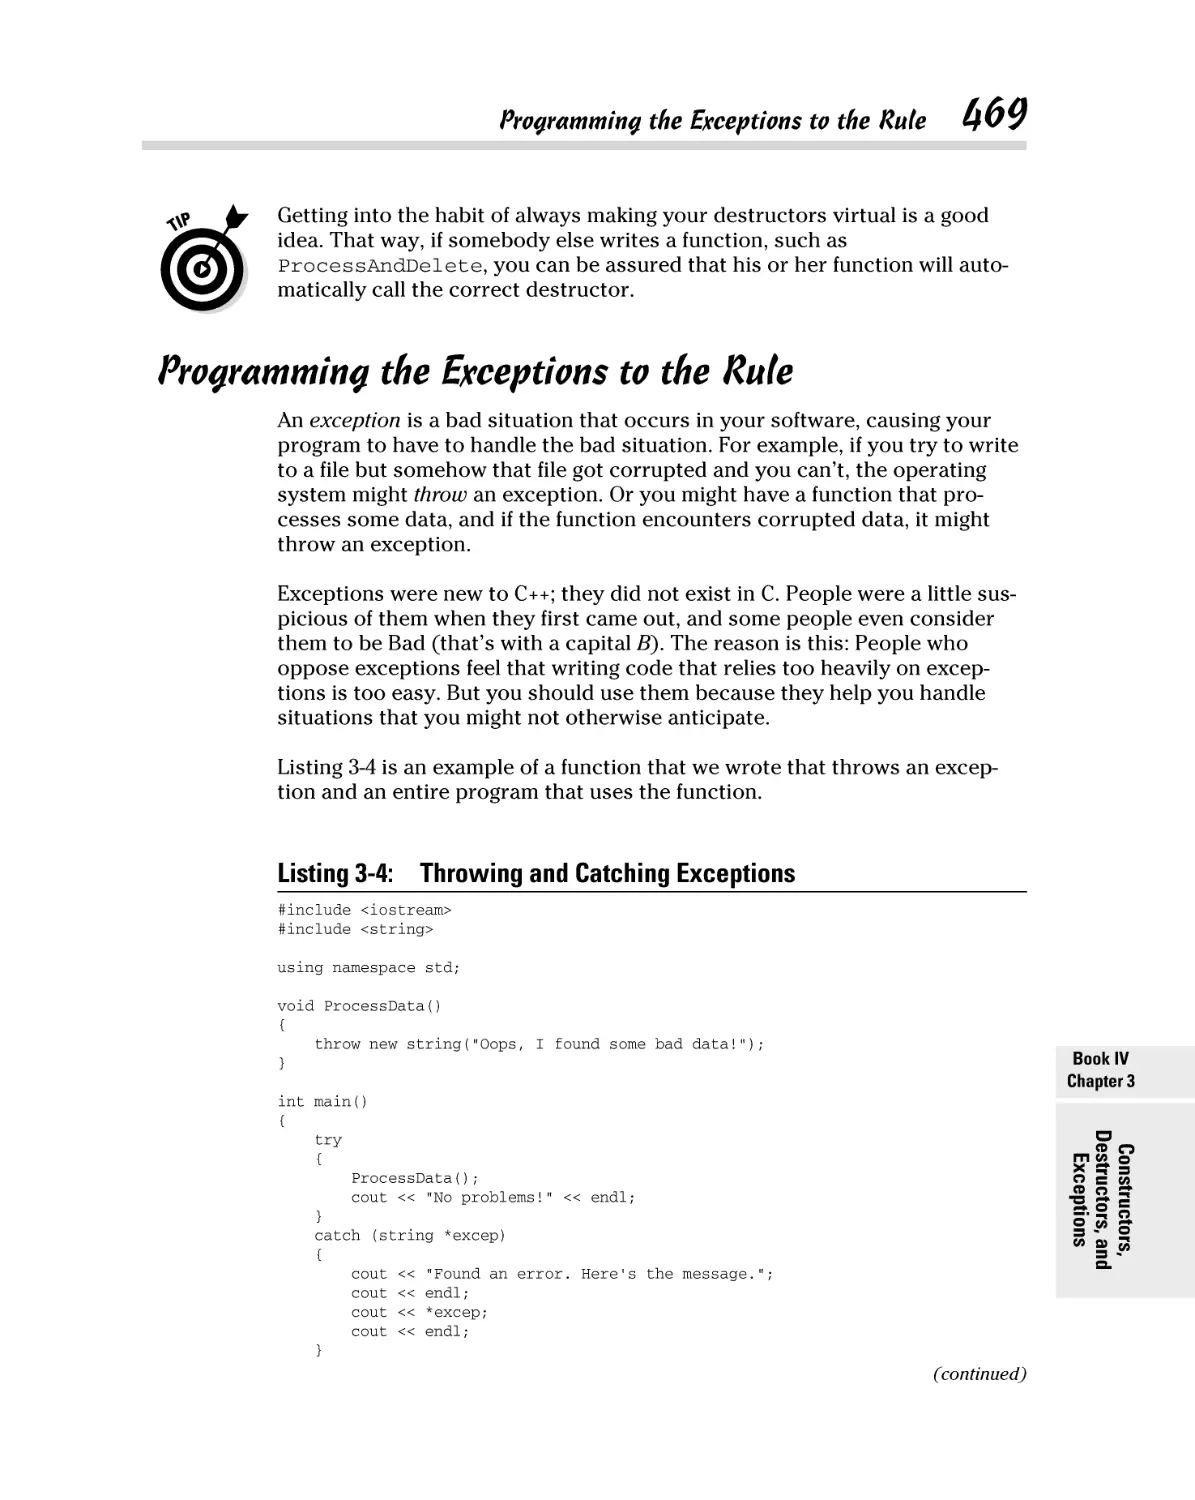 Programming the Exceptions to the Rule